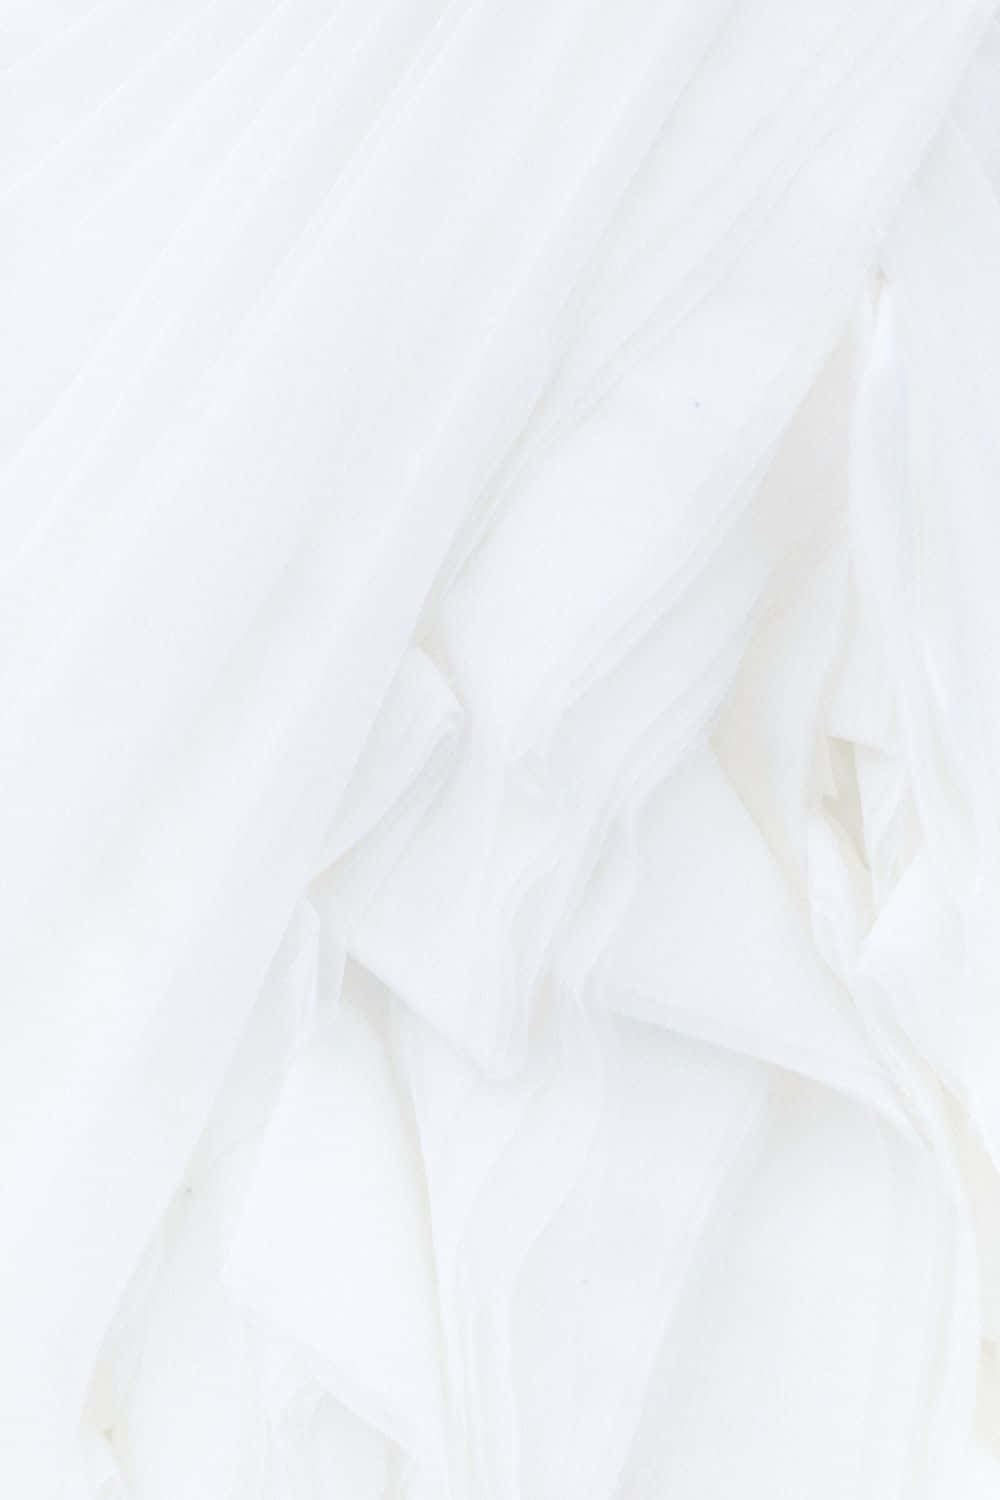 Download White Chiffon Fabric - Close Up | Wallpapers.com